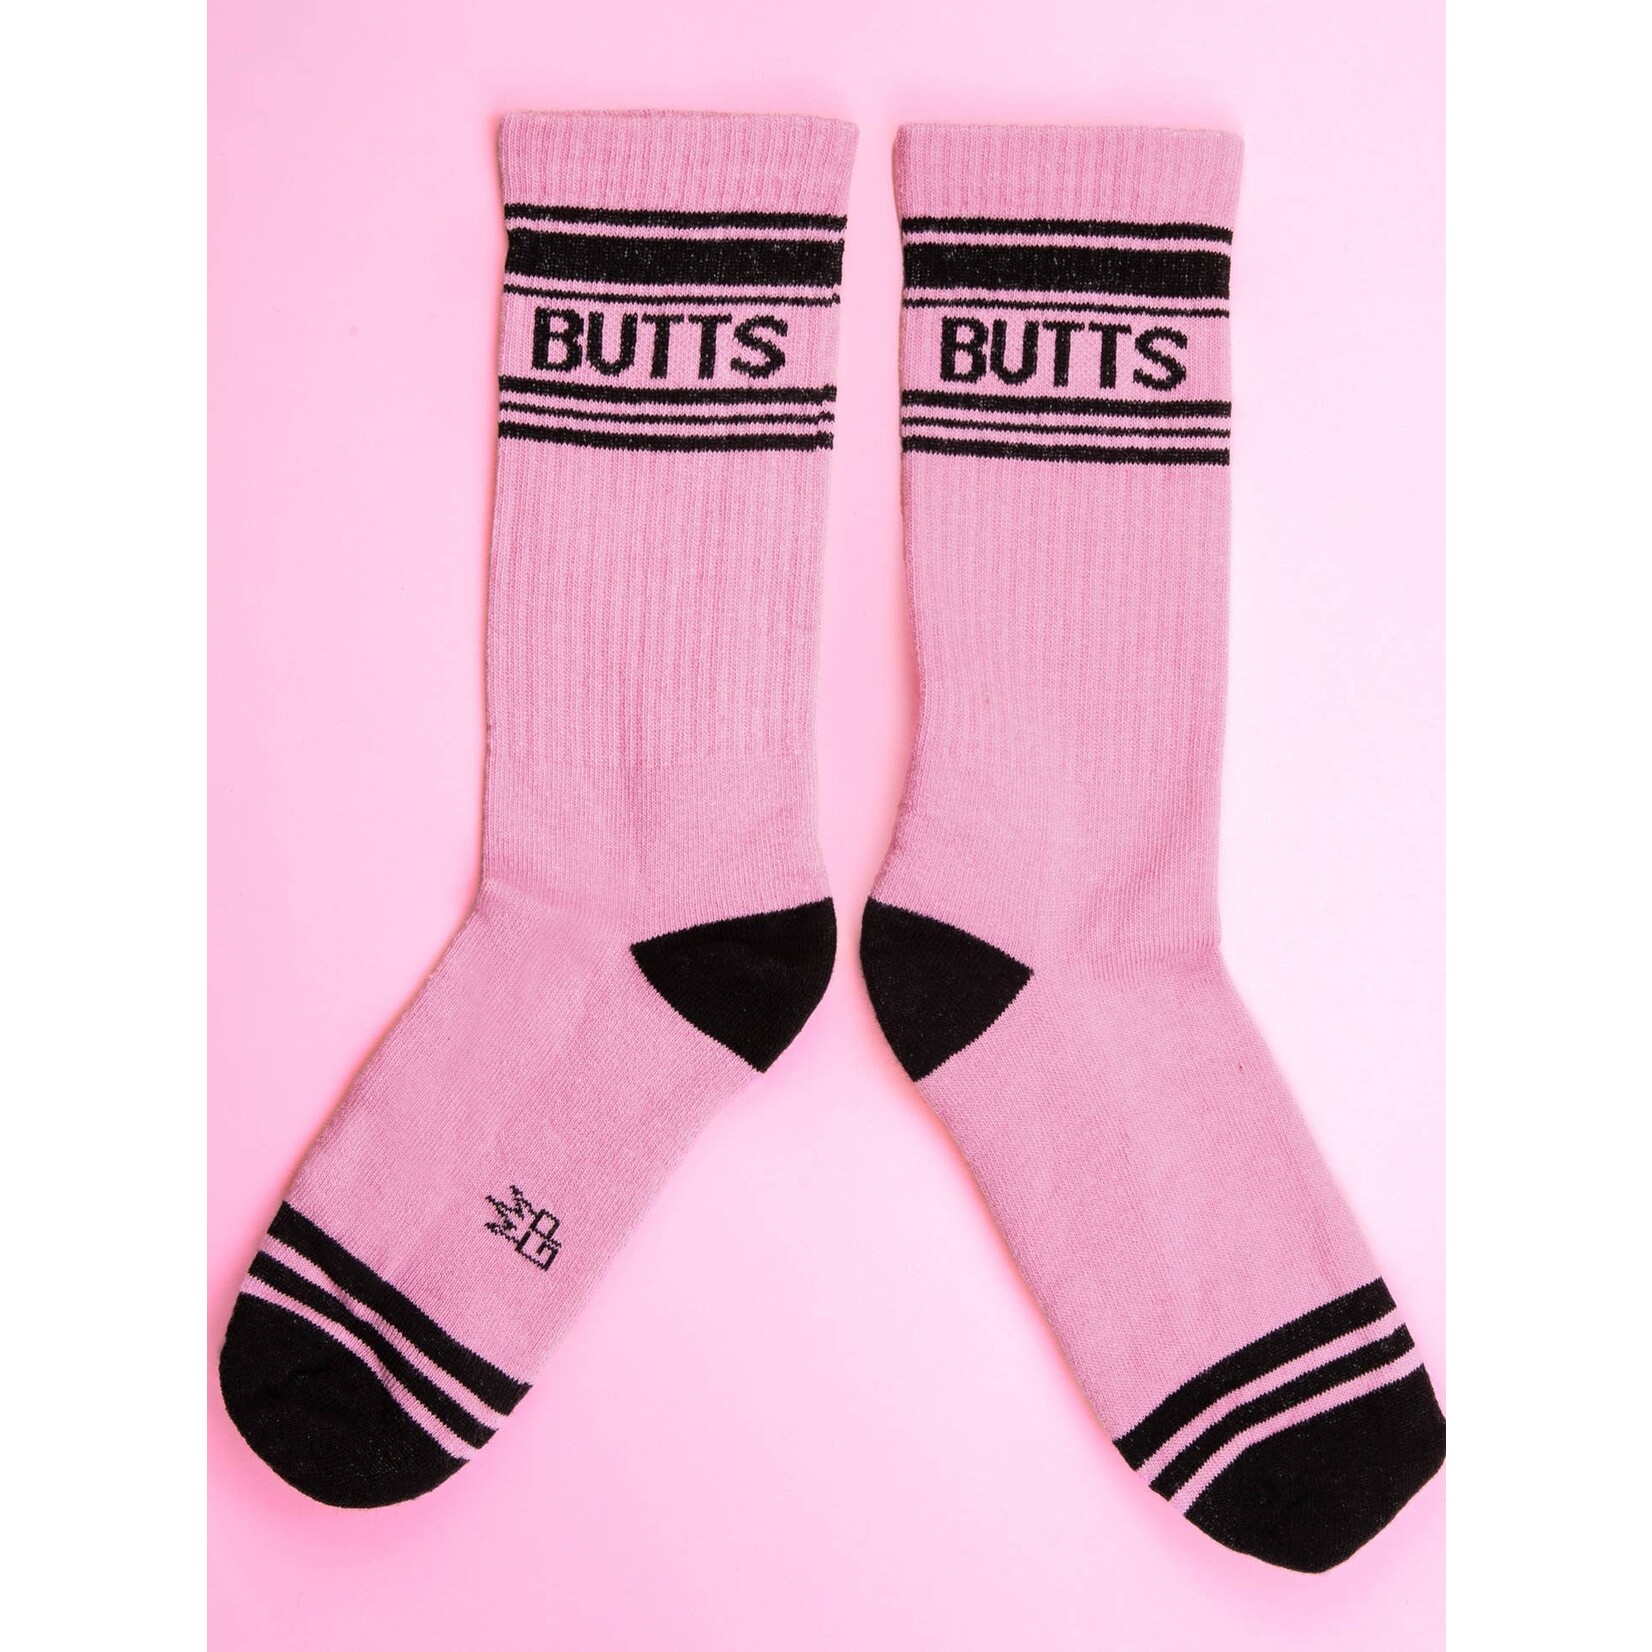 Gumball Poodle Butts Gym Crew Socks